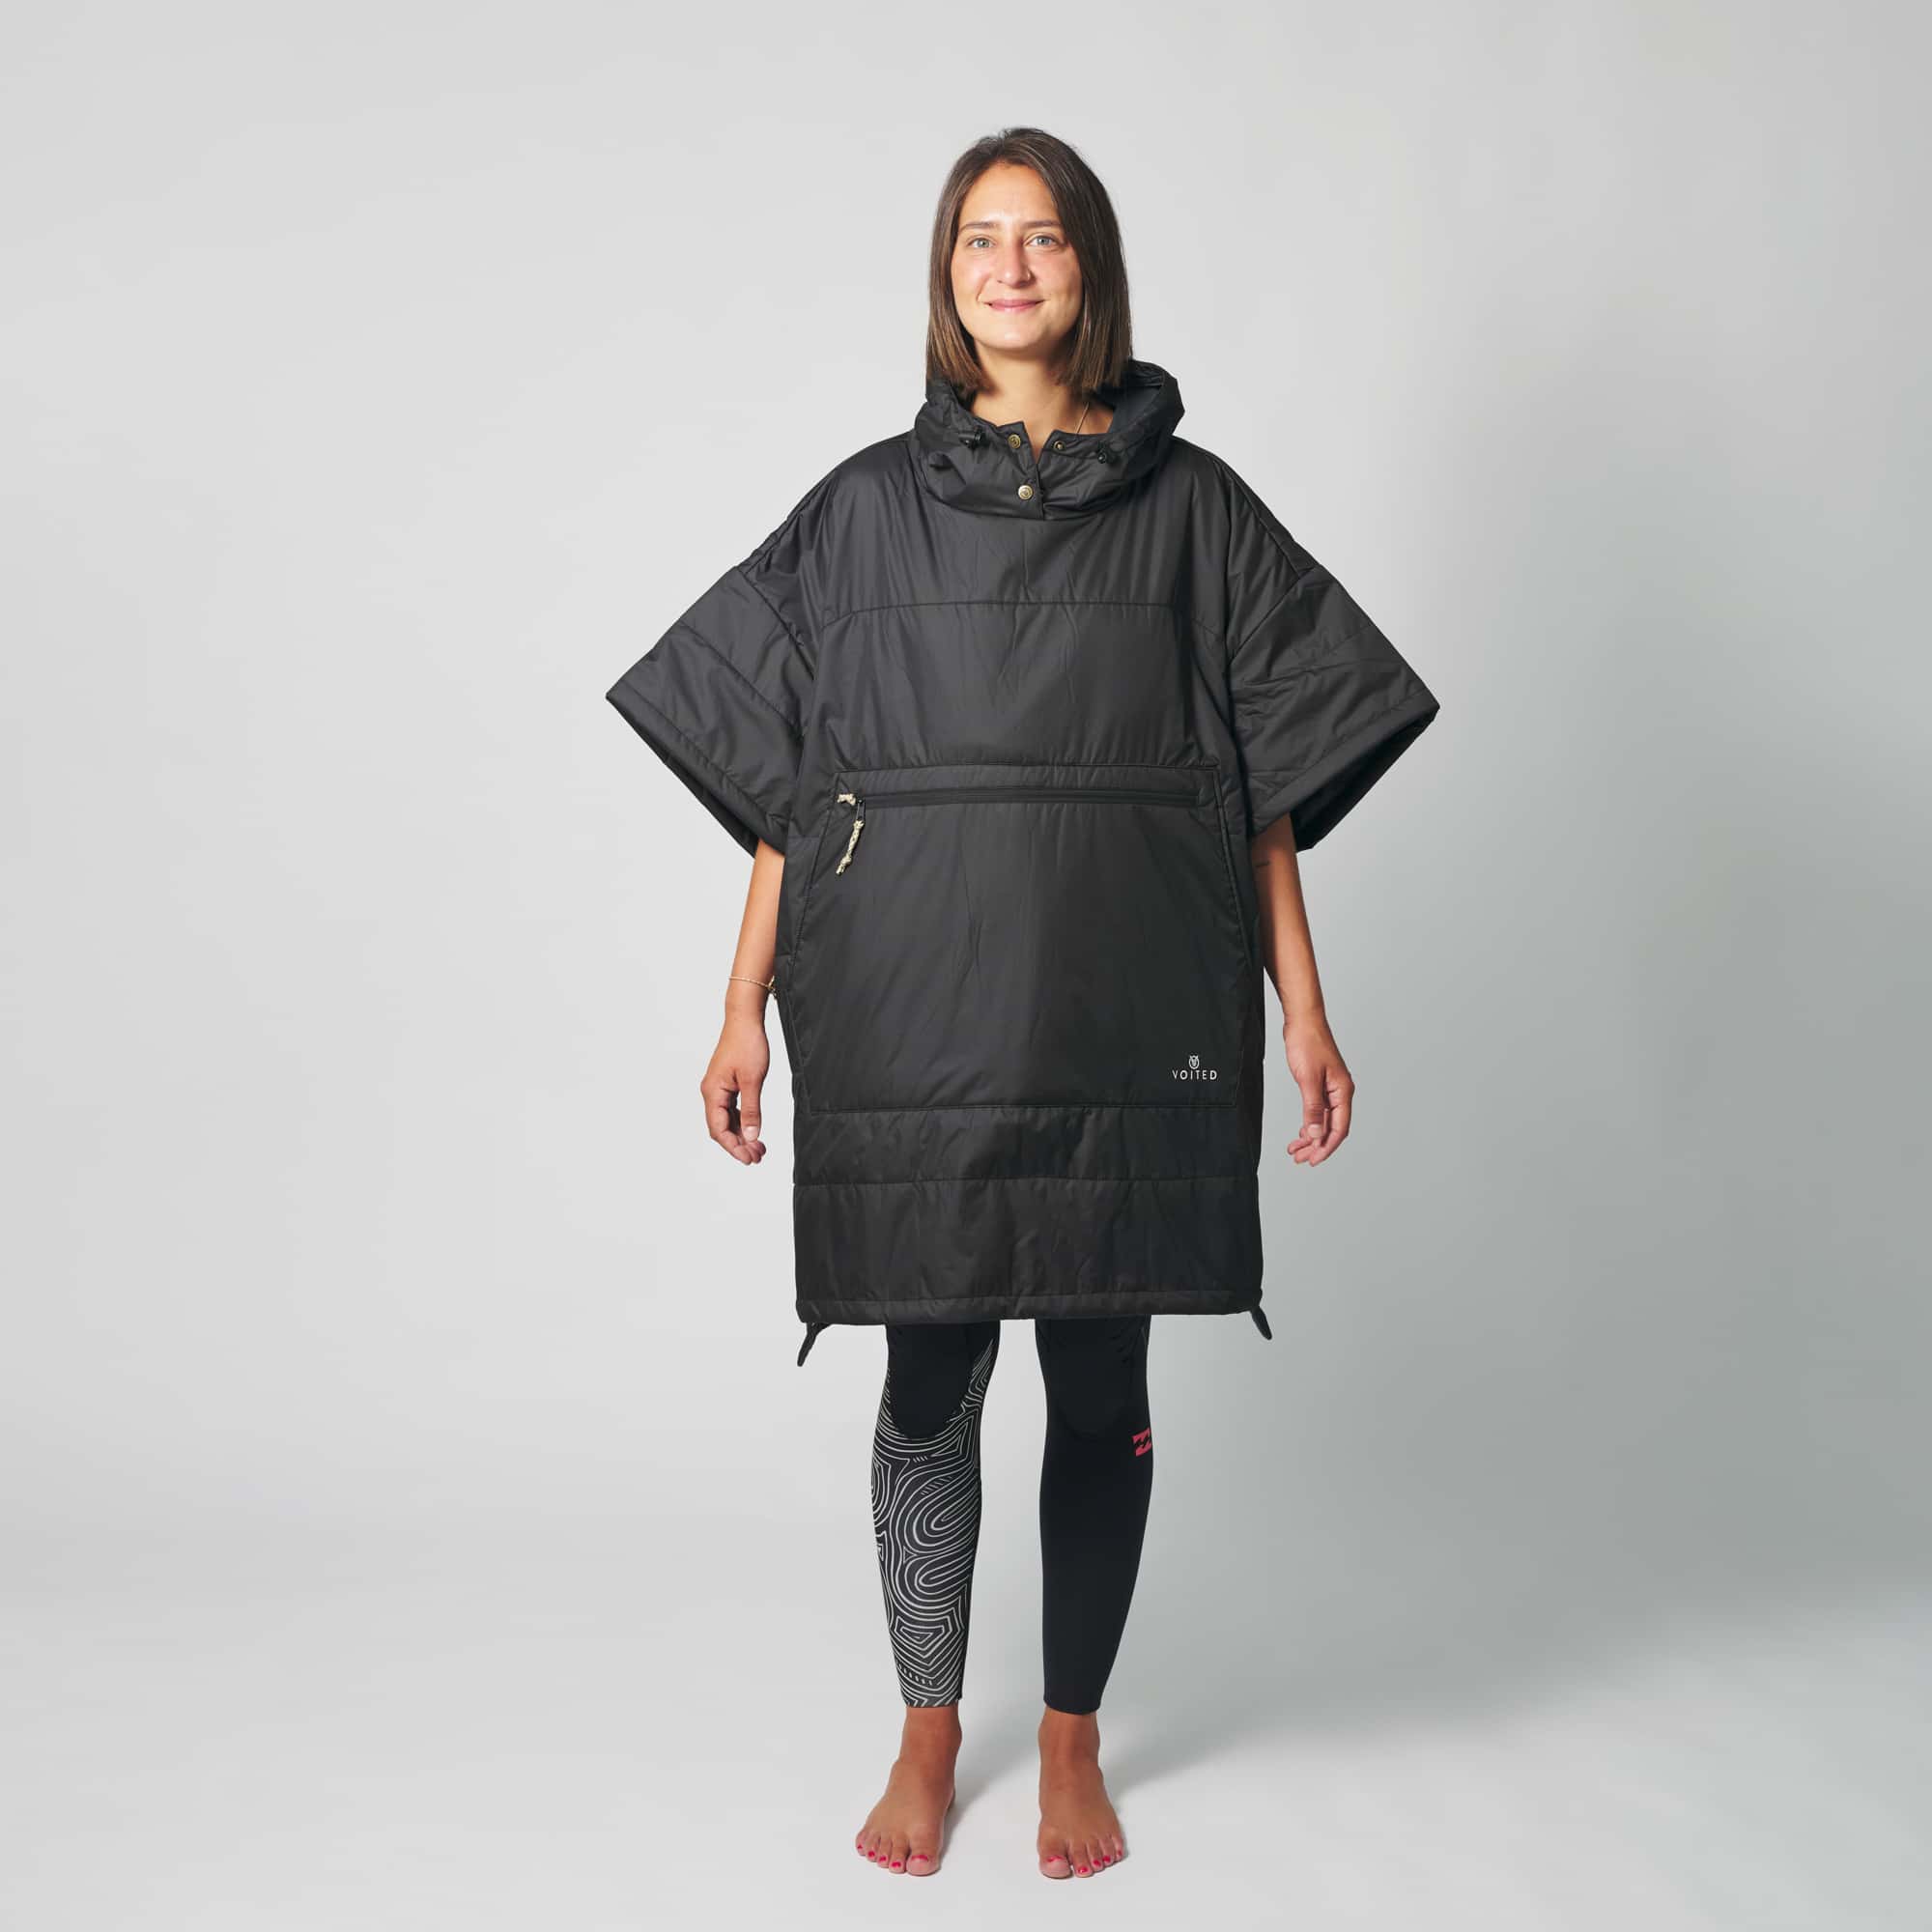 VOITED 2nd Edition Outdoor Poncho for Surfing, Camping, Vanlife & Wild Swimming - Black